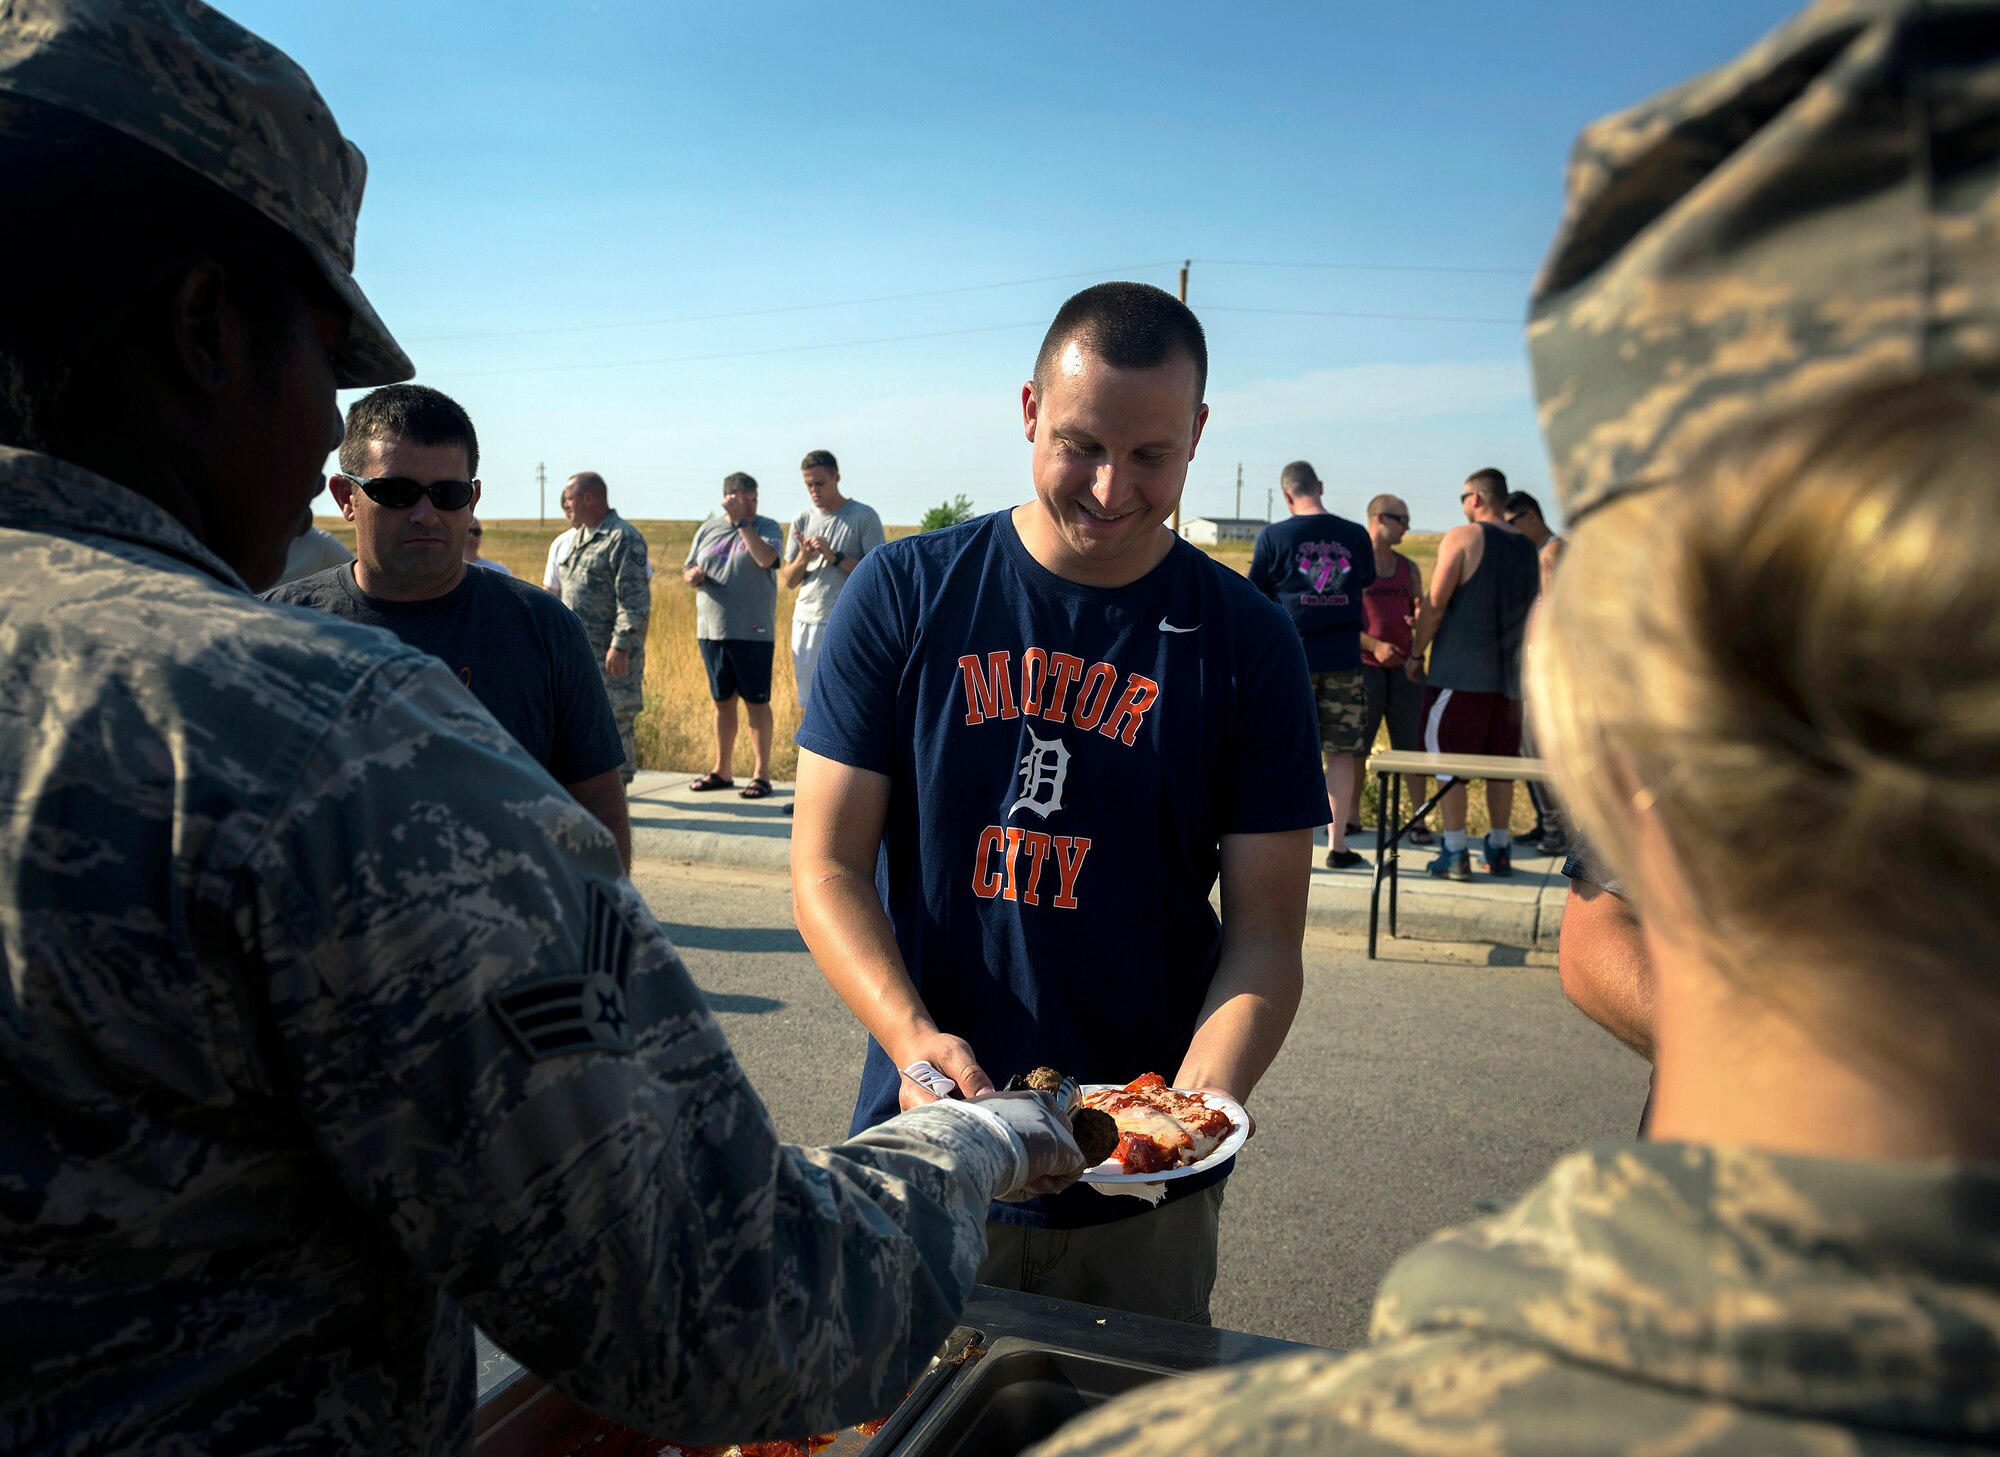 U.S. Air Force Senior Airman Derek Elsey, a water and fuel systems maintenance specialist with the 182nd Civil Engineer Squadron, Illinois Air National Guard, gets manicotti and meatballs for dinner in Crow Agency, Mont., Aug. 1, 2017. Force Support Squadron services specialists provided meal support to the squadron’s unit members while they built veterans’ homes for the Innovative Readiness Training program. (U.S. Air National Guard photo by Tech. Sgt. Lealan Buehrer)